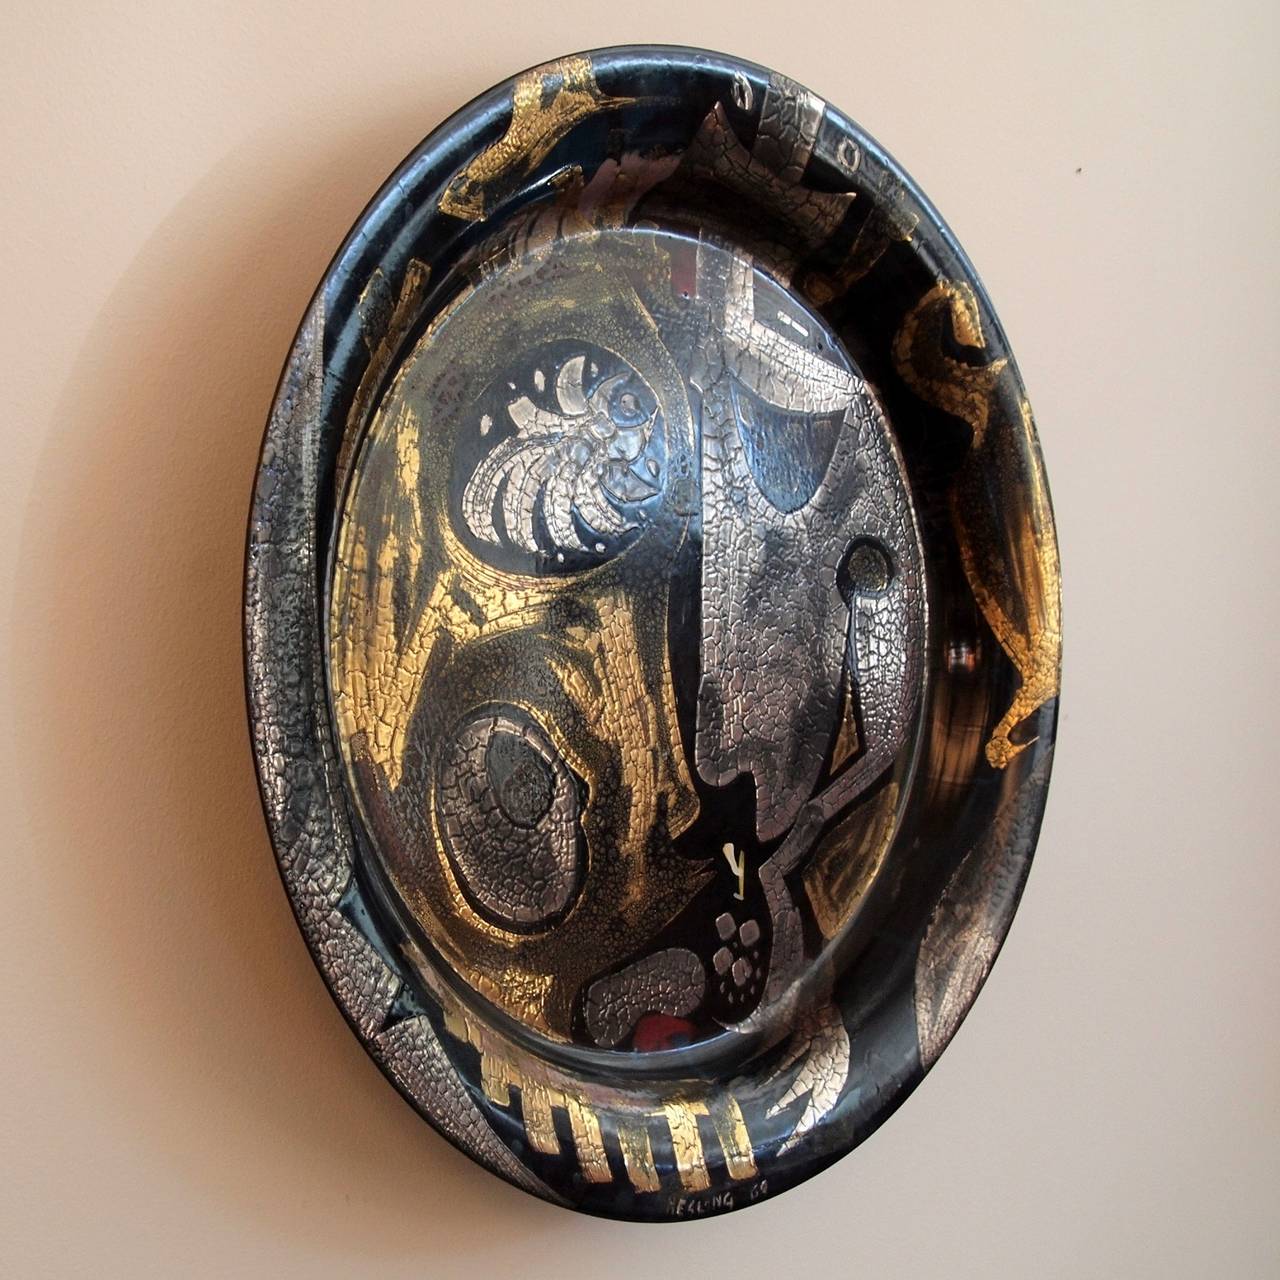 Steel platter with vitreous enamel decoration, showing two faces. Silver and gold on a navy ground. Signed and dated 1969. 

Hesling was a British born artist who settled in Australia and had a varied and interesting career a bit of a tearaway as